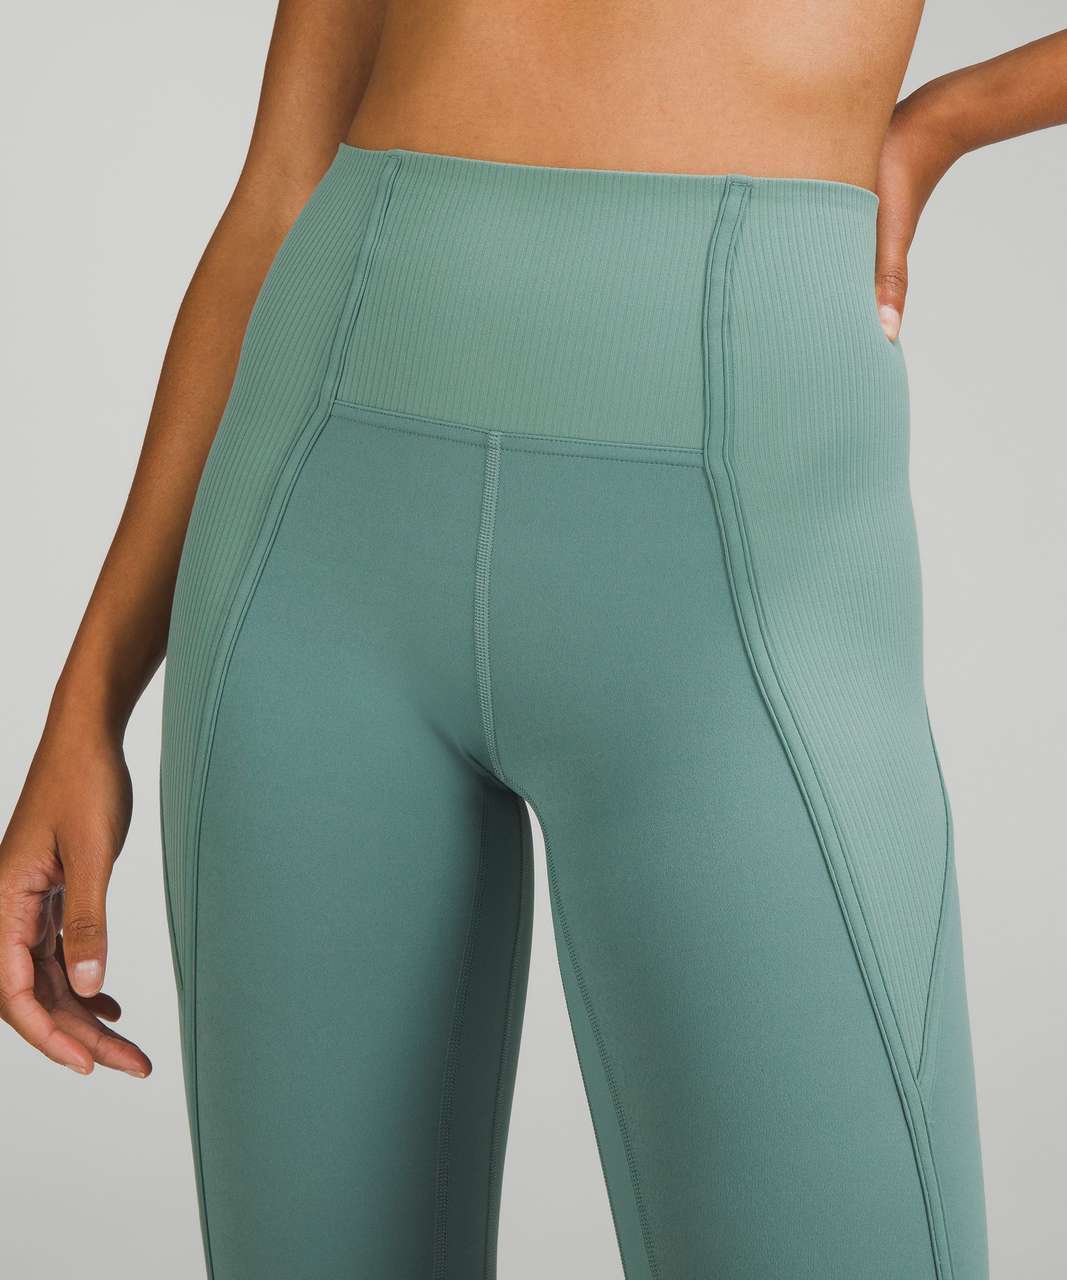 Lululemon Align Ribbed Panel High-Rise Tight 25" - Tidewater Teal